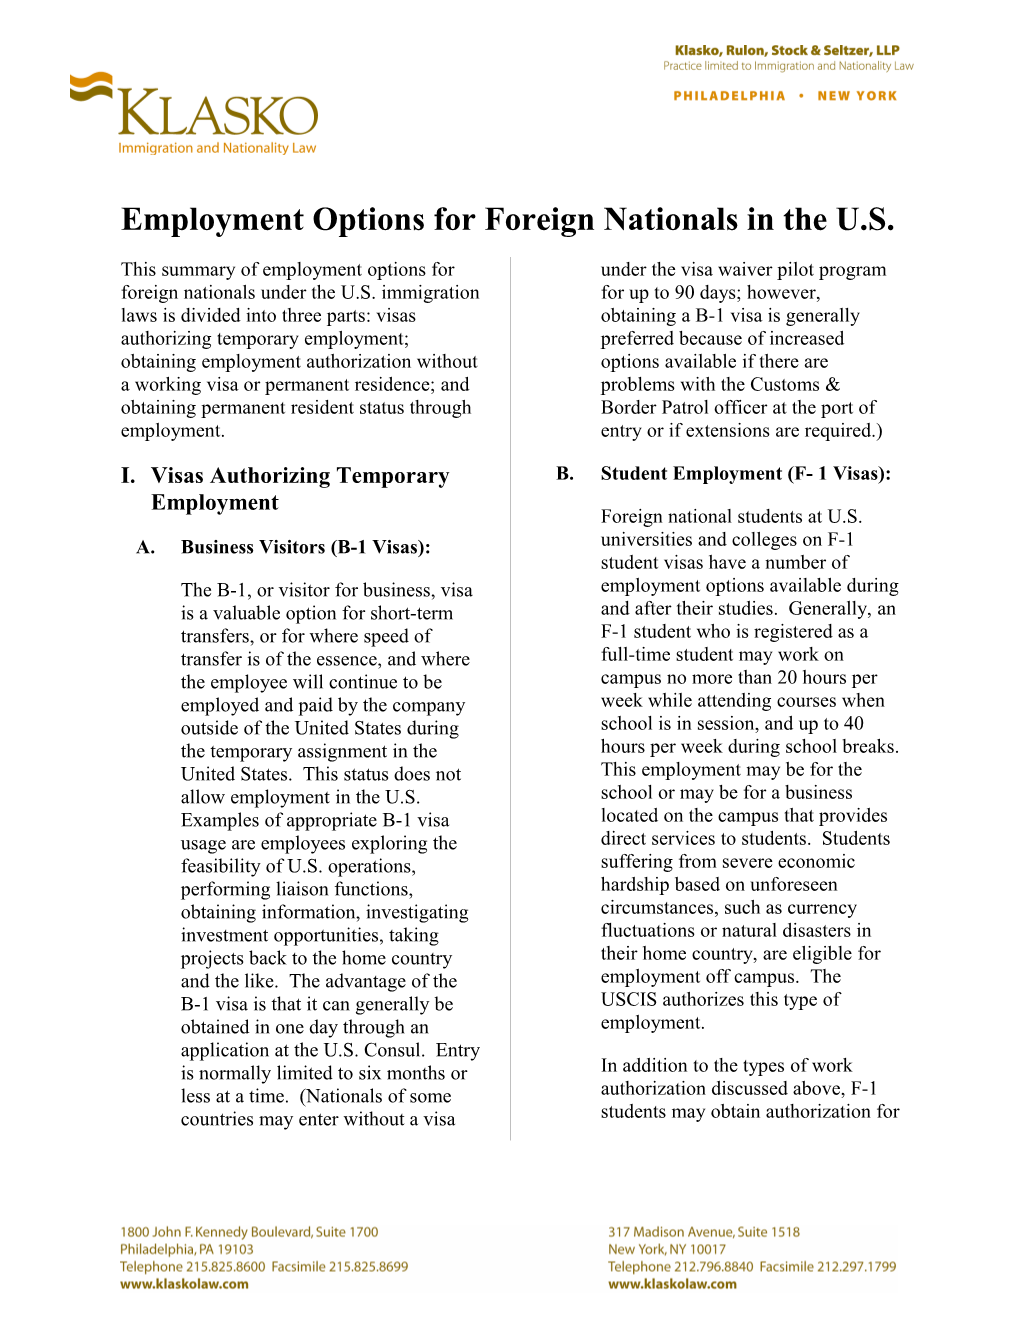 Update- Employment Options for Foreign Nationals in US (00000152;2)